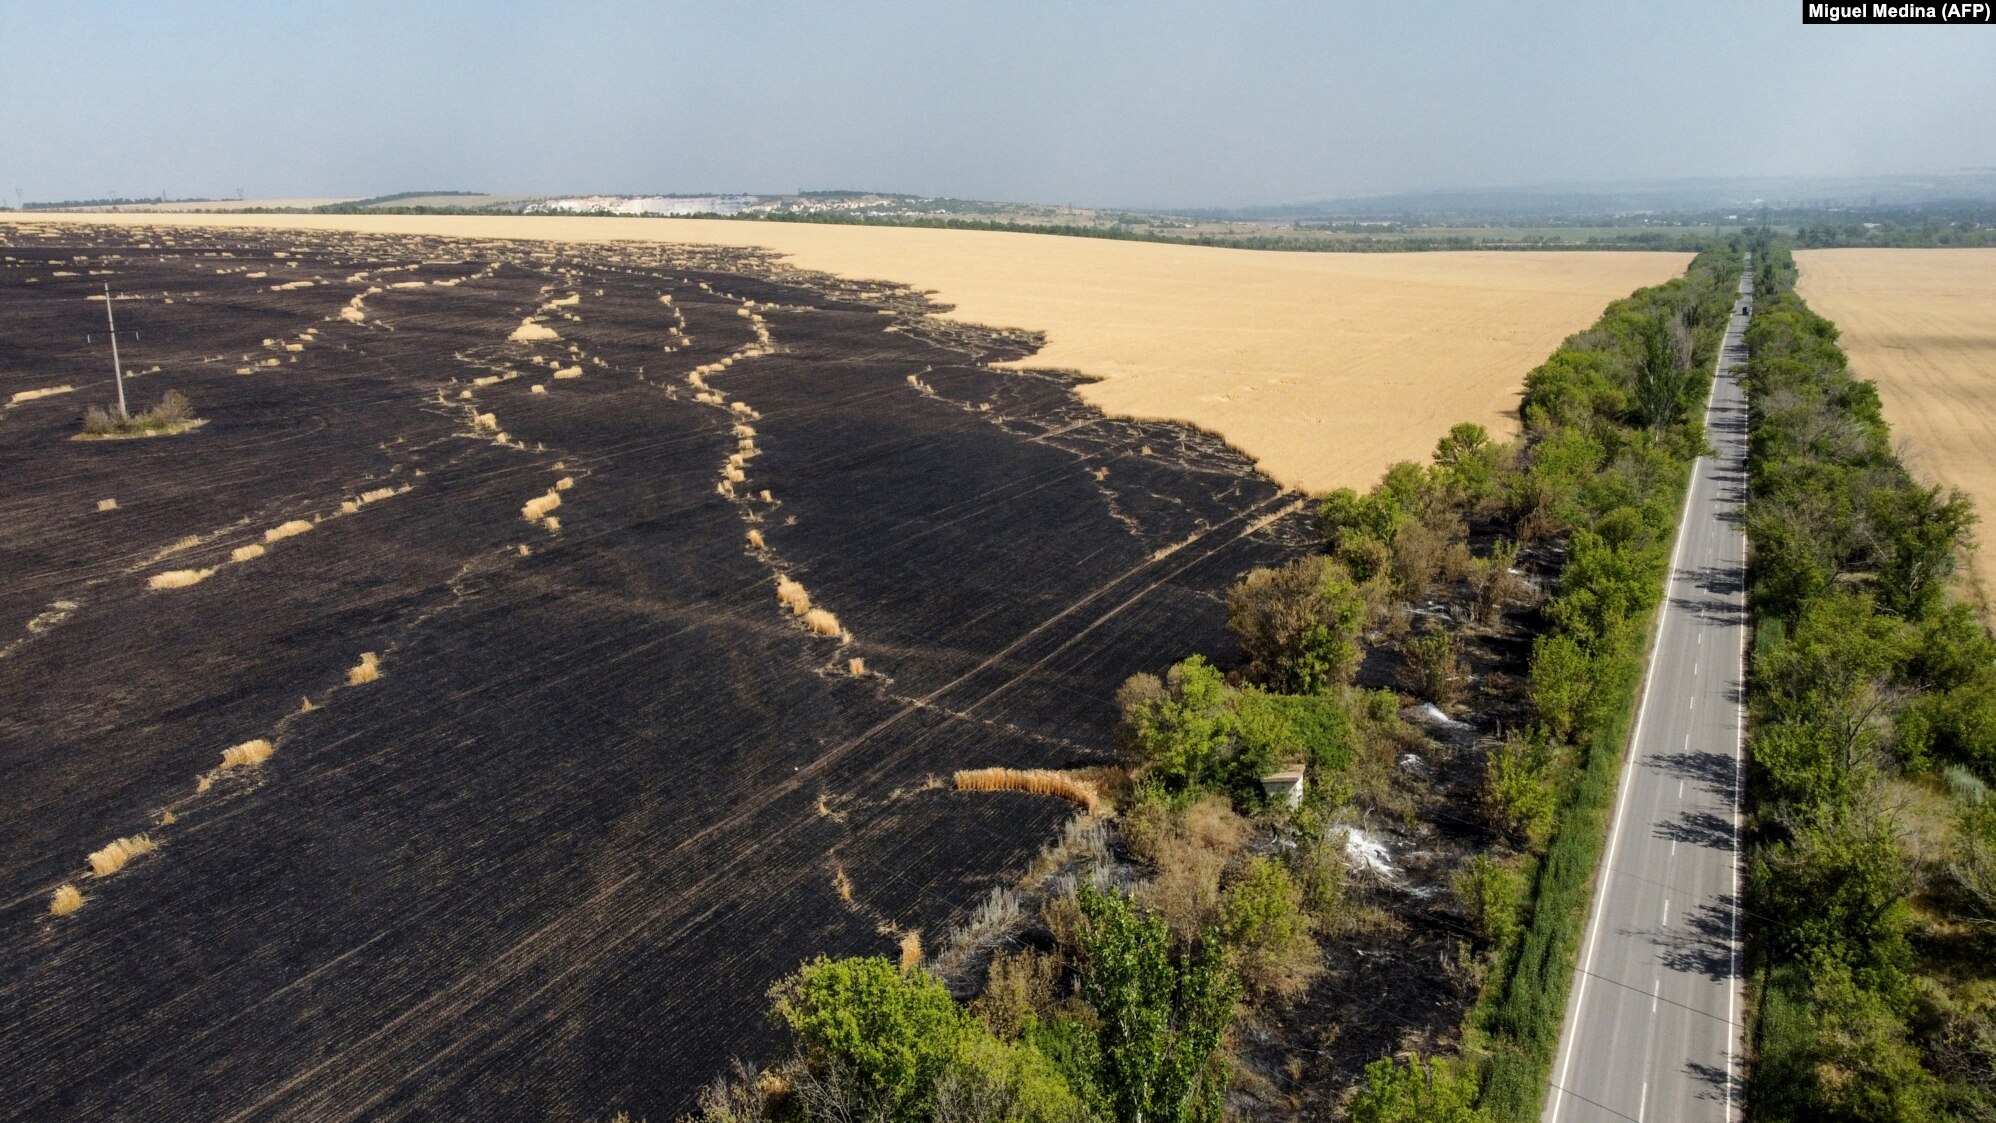 An aerial photo taken on 8 July 2022 shows the widespread destruction of a wheat field near Siversk in the Donetsk region of Ukraine. Fires in dry wheat fields can easily be sparked by explosions or the red-hot fragments of artillery shrapnel. Photo: Miguel Medina / AFP